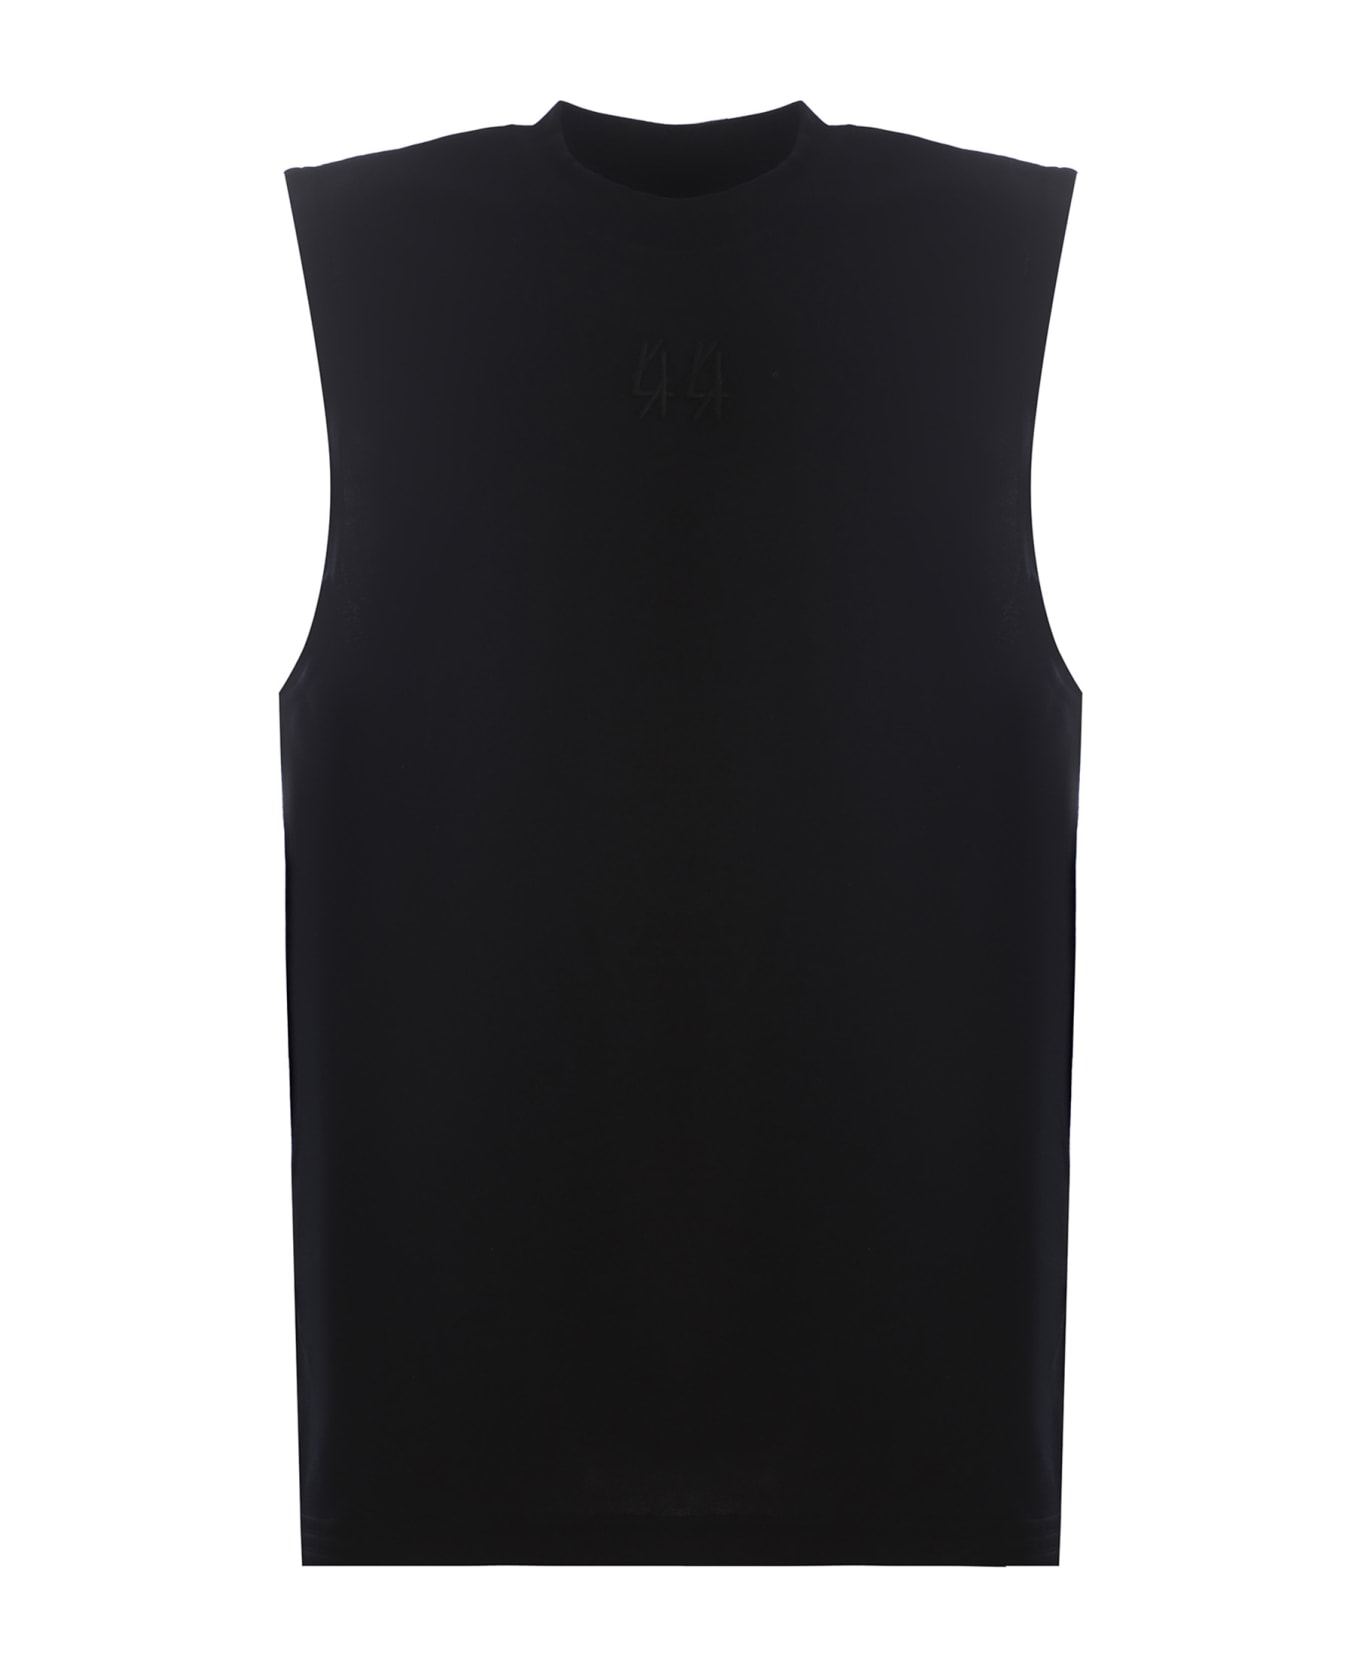 44 Label Group Tank Top 44label Group Made Of Cotton - Nero